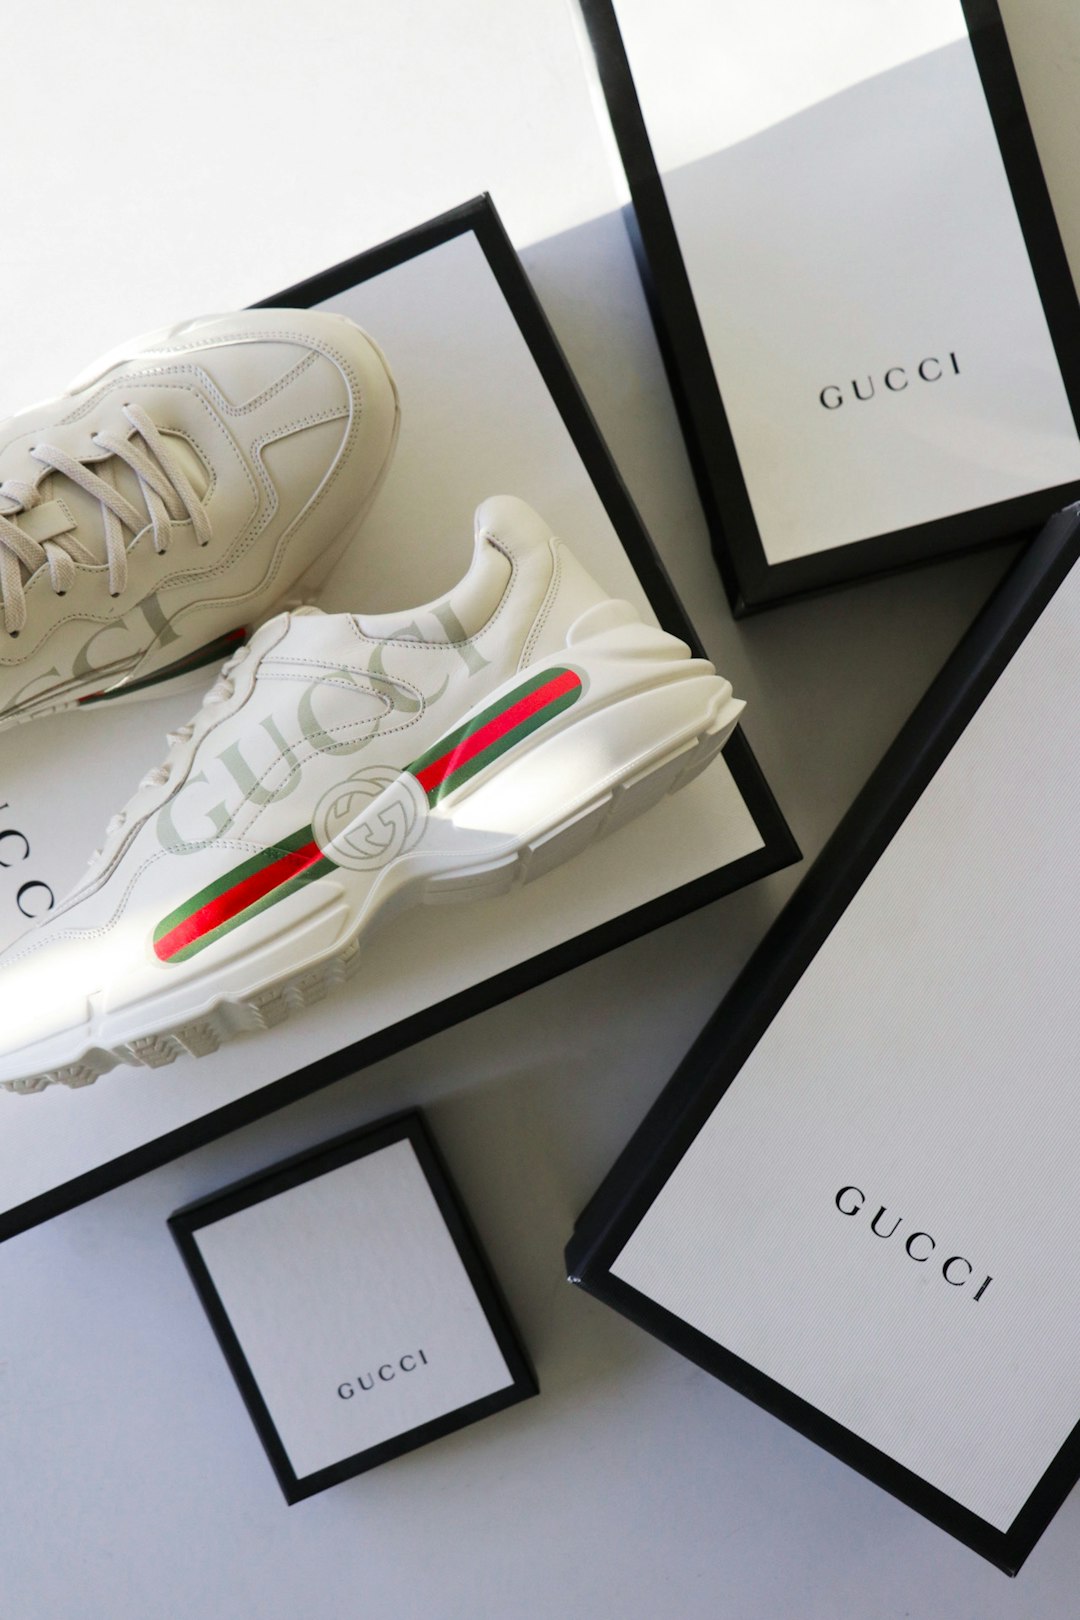 Retail Confessions: Gucci, Part II - by Amy Odell